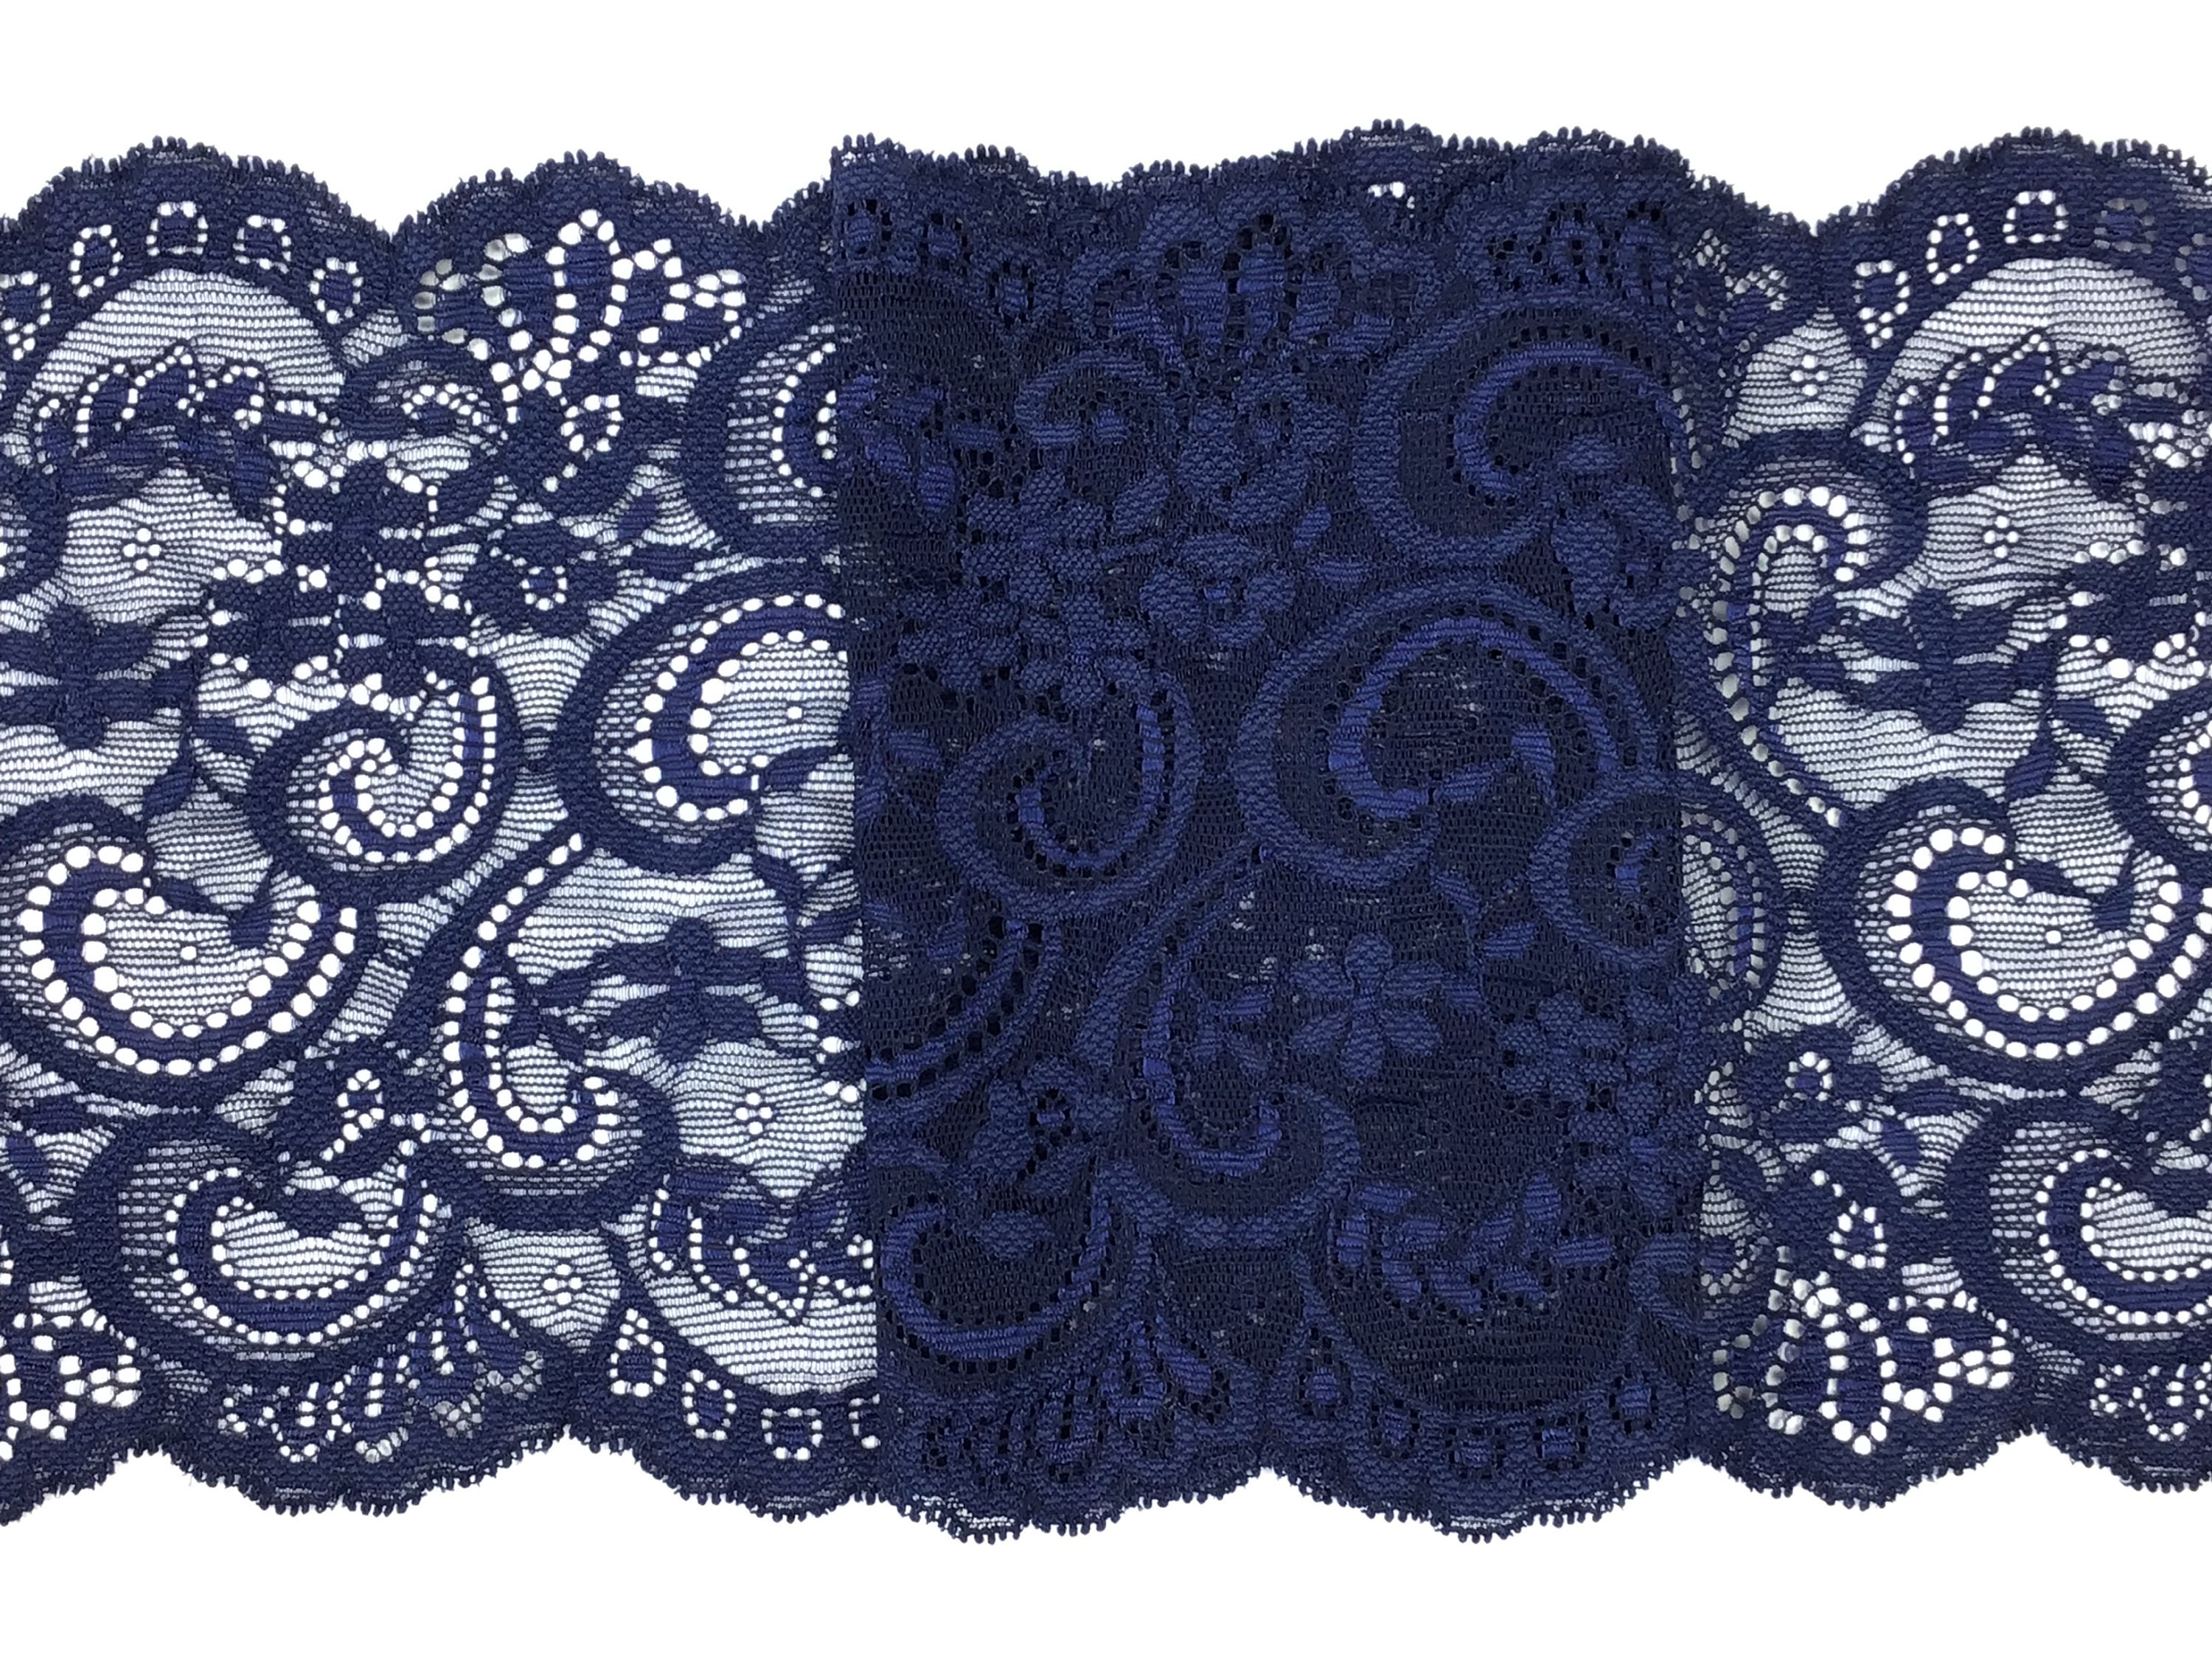 Navy Blue Galloon Lace with Ribbon and Crochet Stitch - 2.5 - (NB0212U01)  